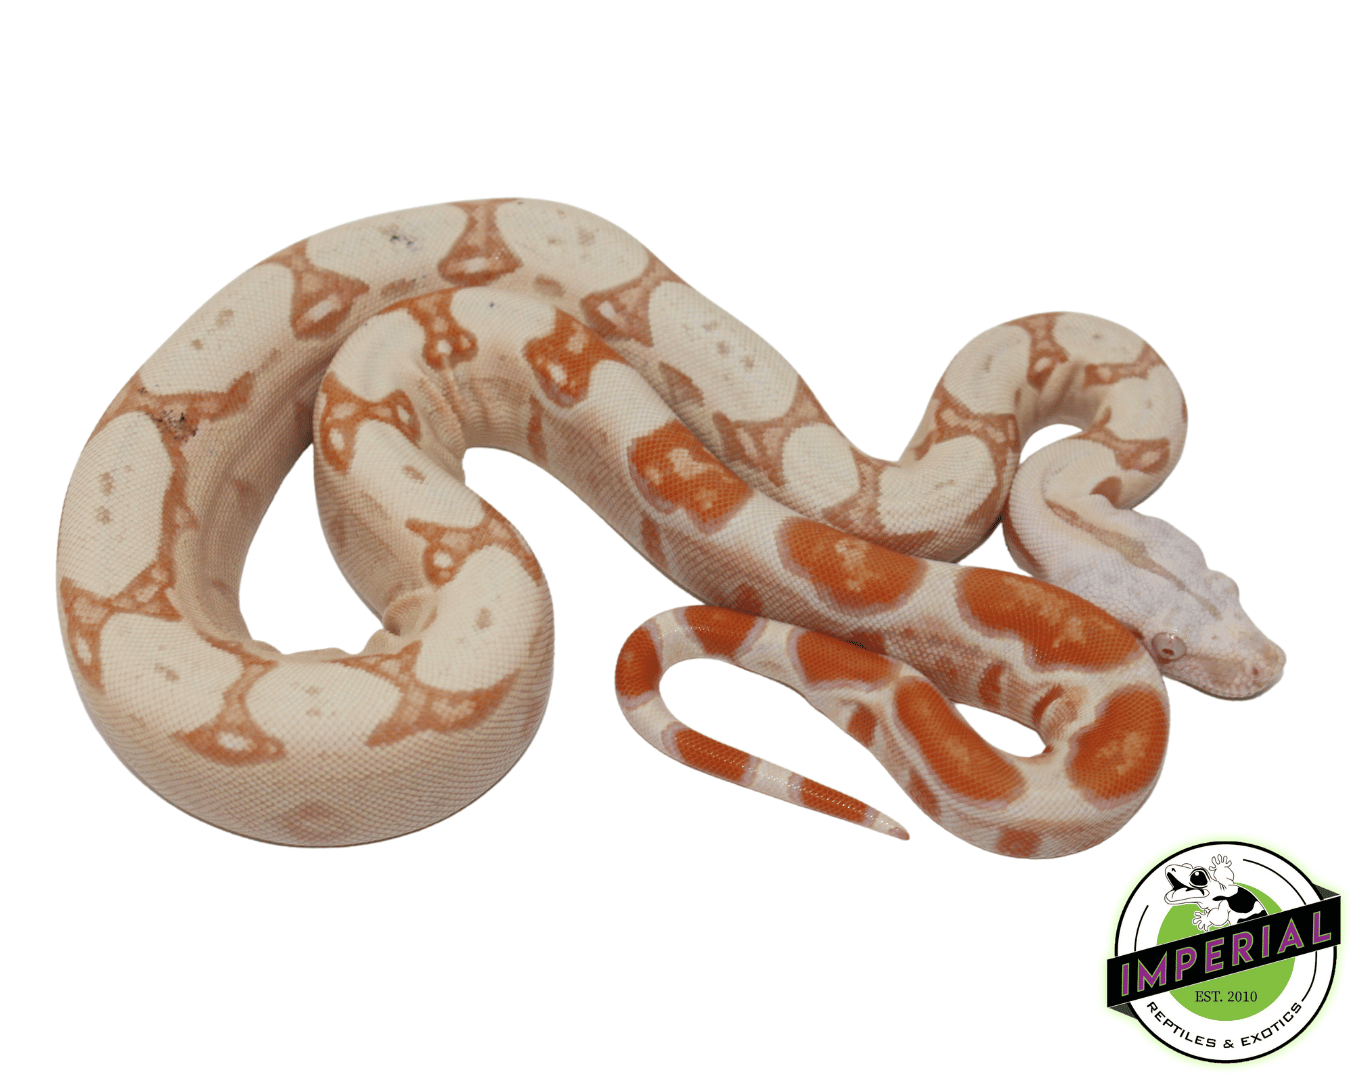 paradox sunglow colombian boa constrictor for sale, buy reptiles online